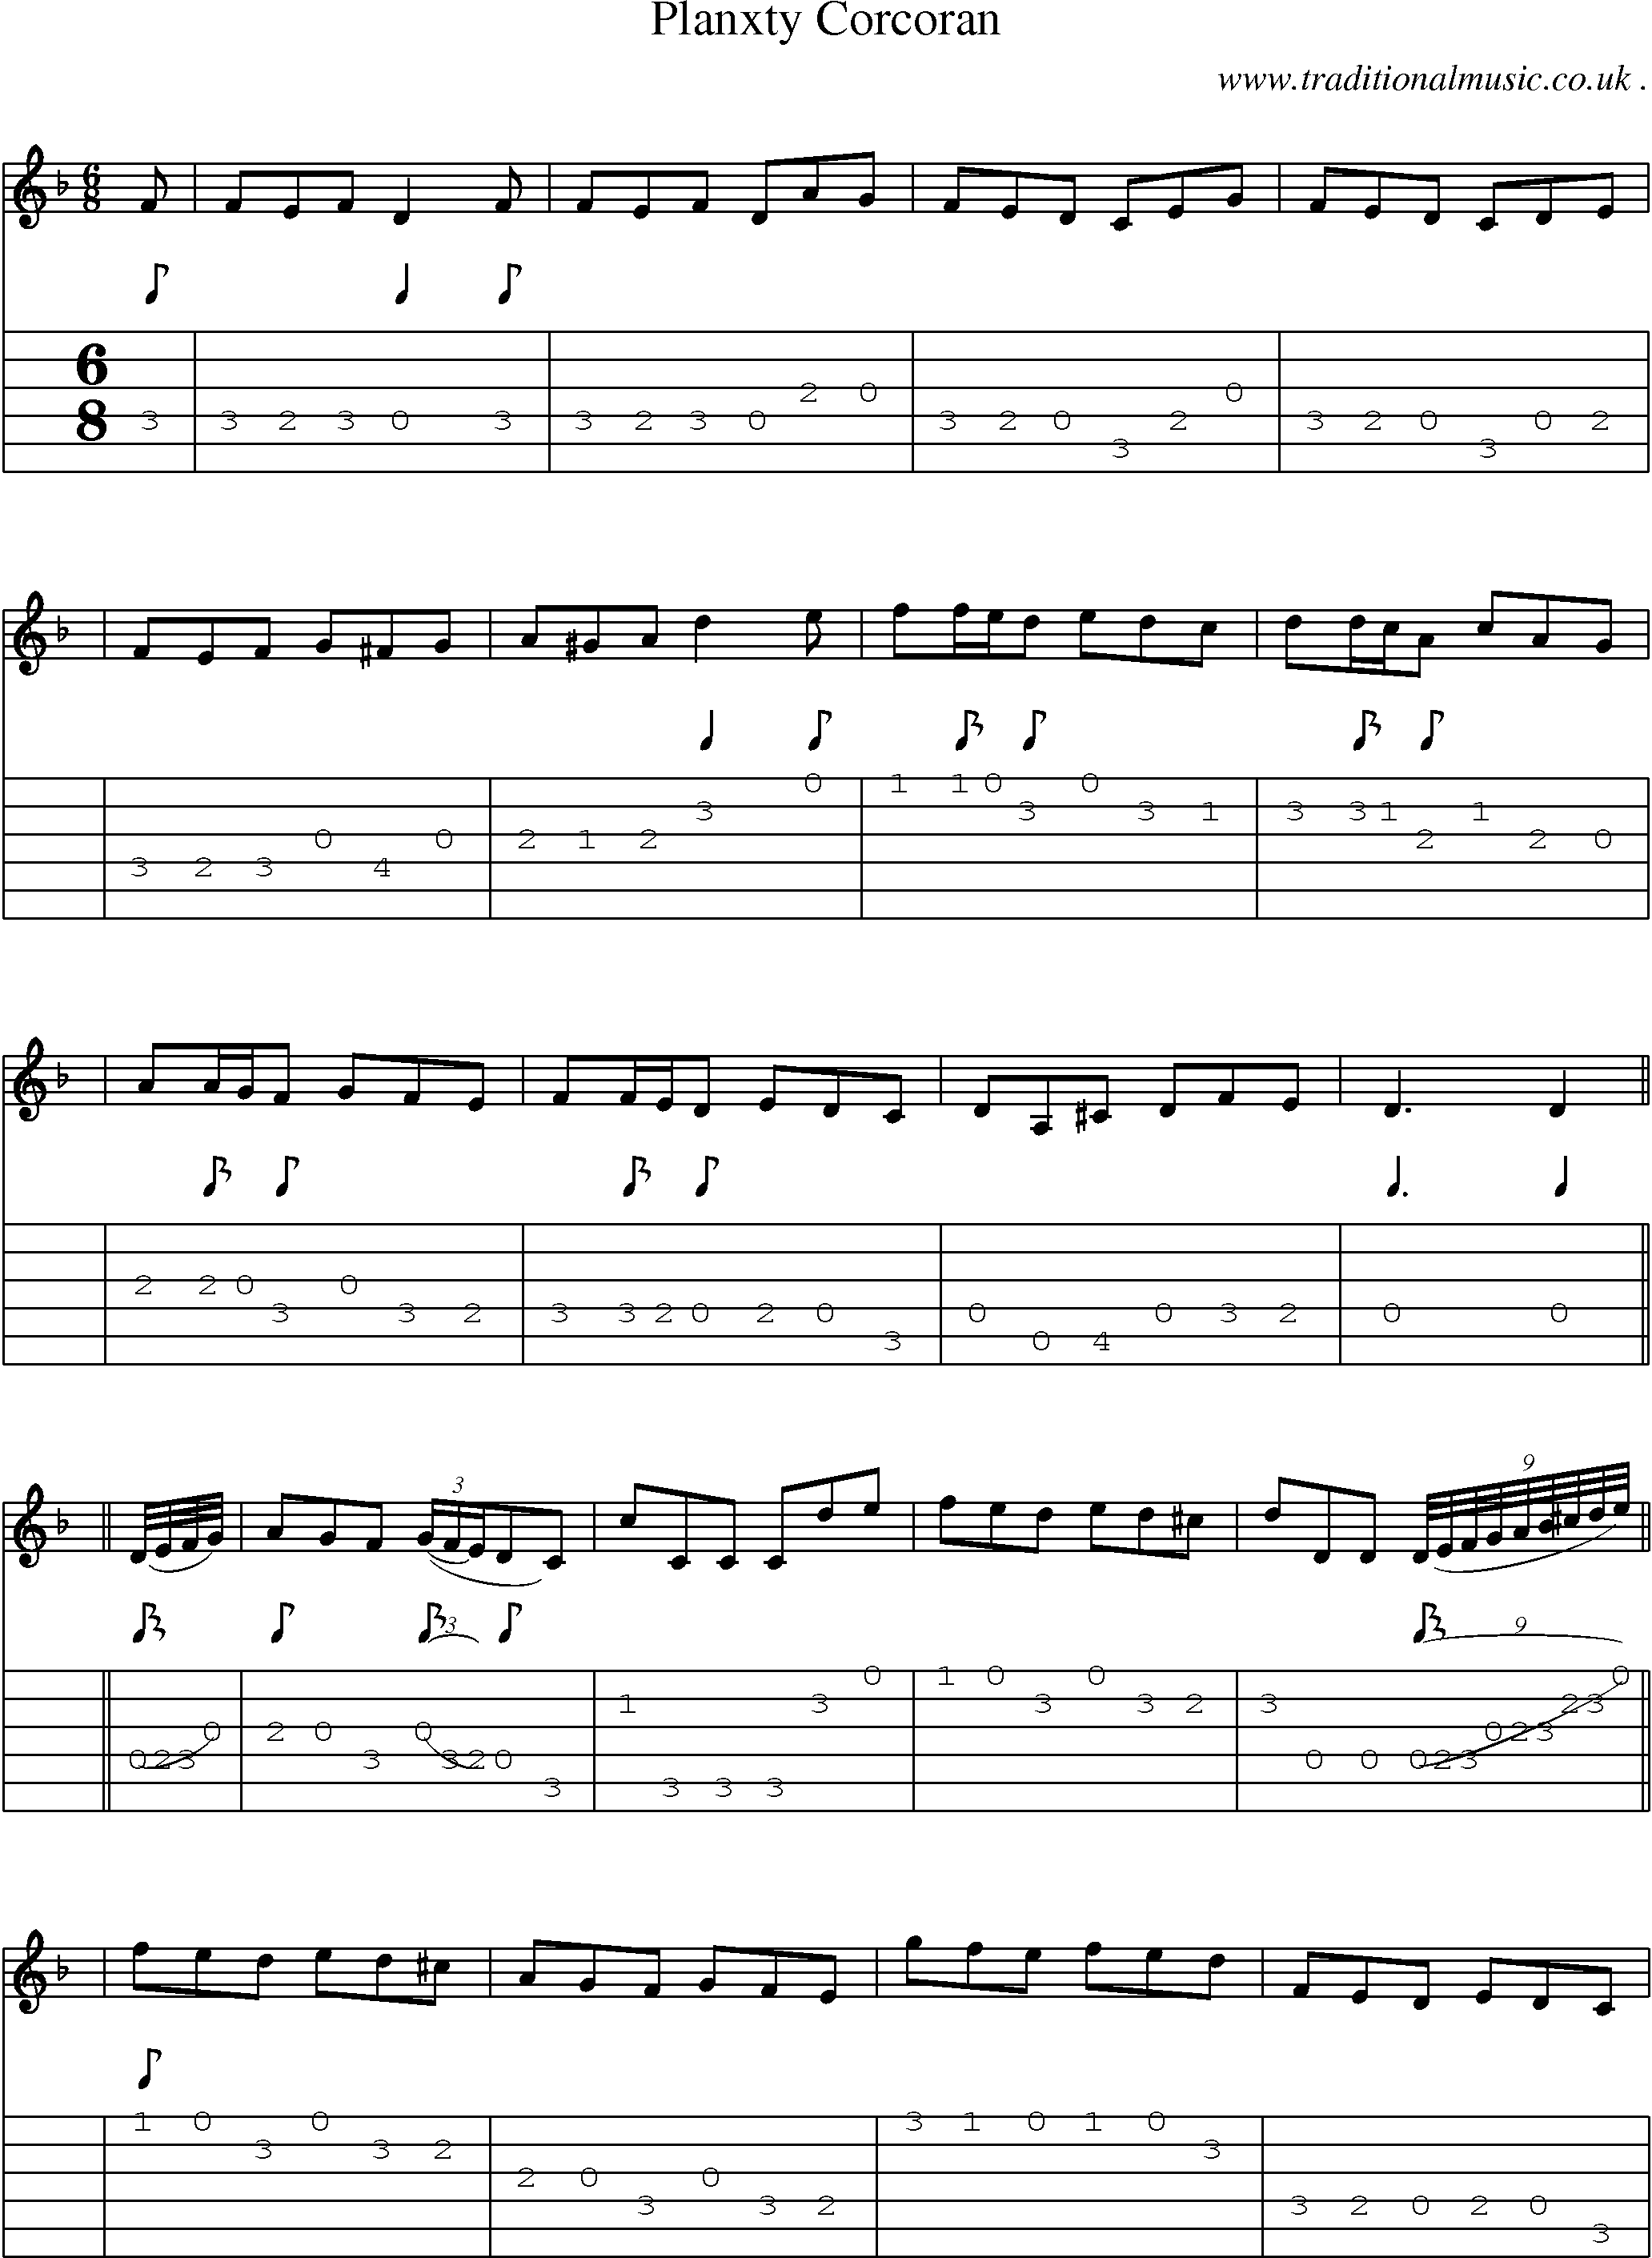 Sheet-music  score, Chords and Guitar Tabs for Planxty Corcoran